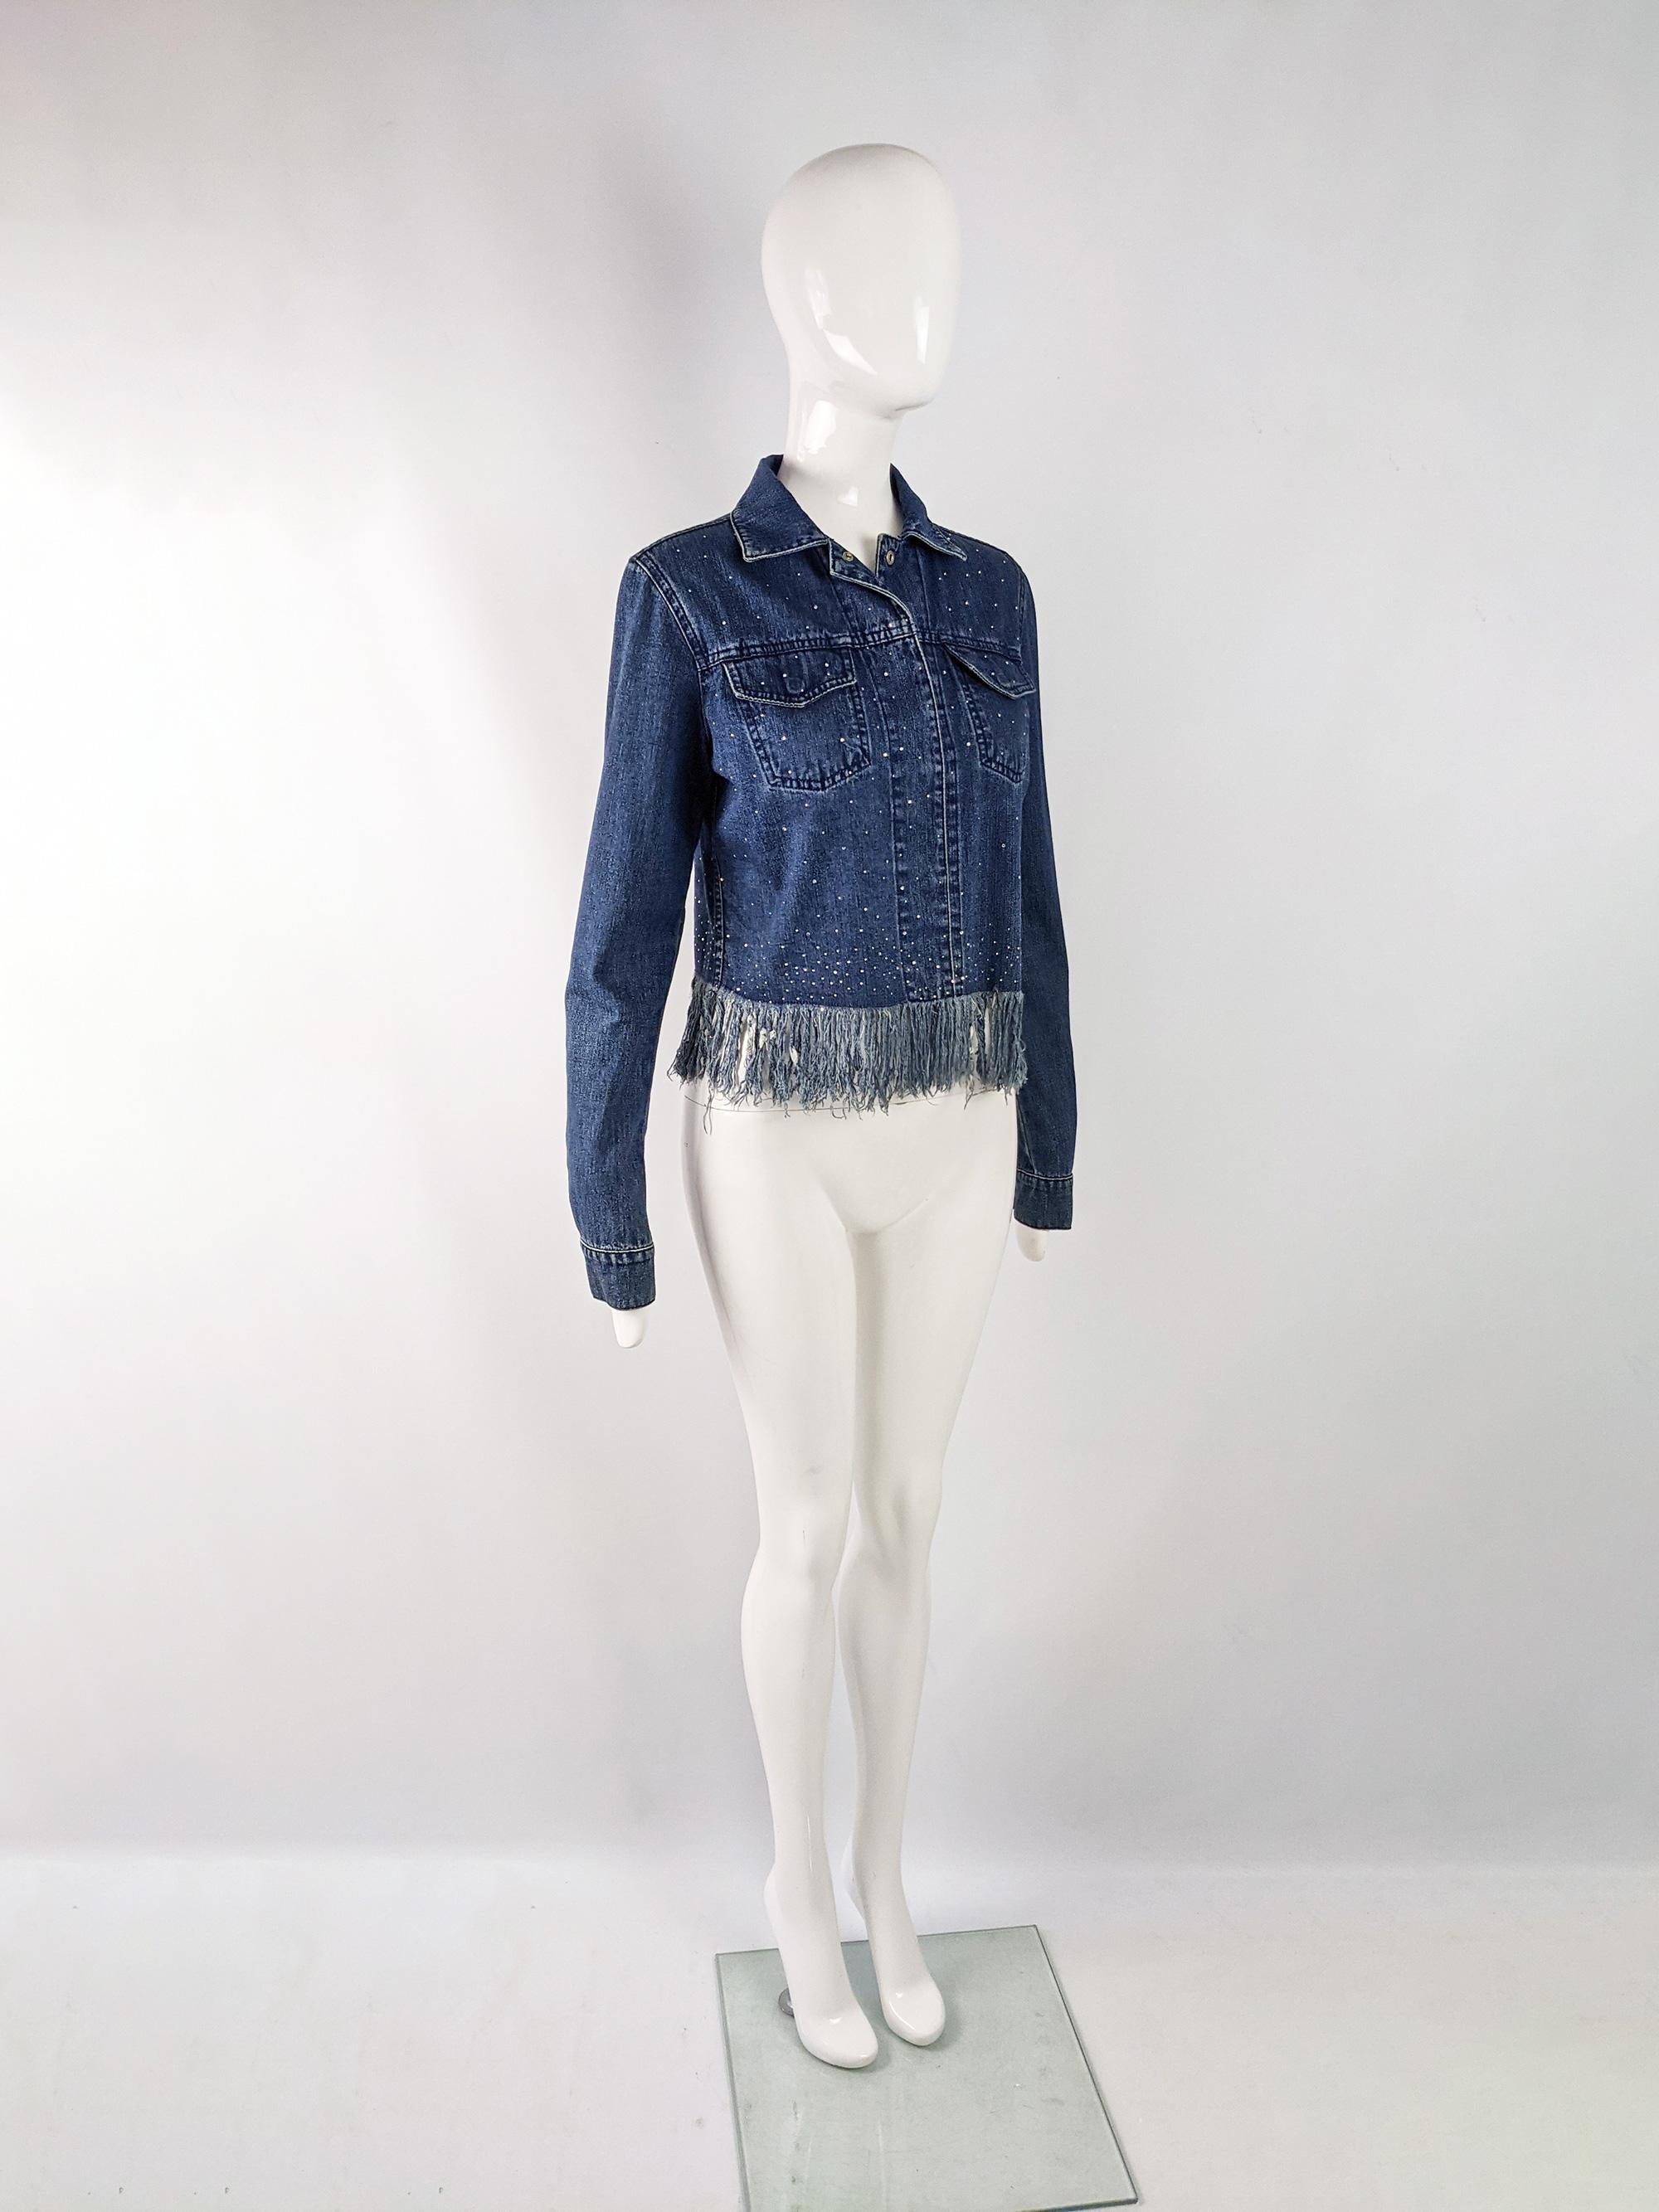 Fendi Vintage Womens Crystal Beaded & Fringed Denim Jacket, 2000s In Good Condition For Sale In Doncaster, South Yorkshire